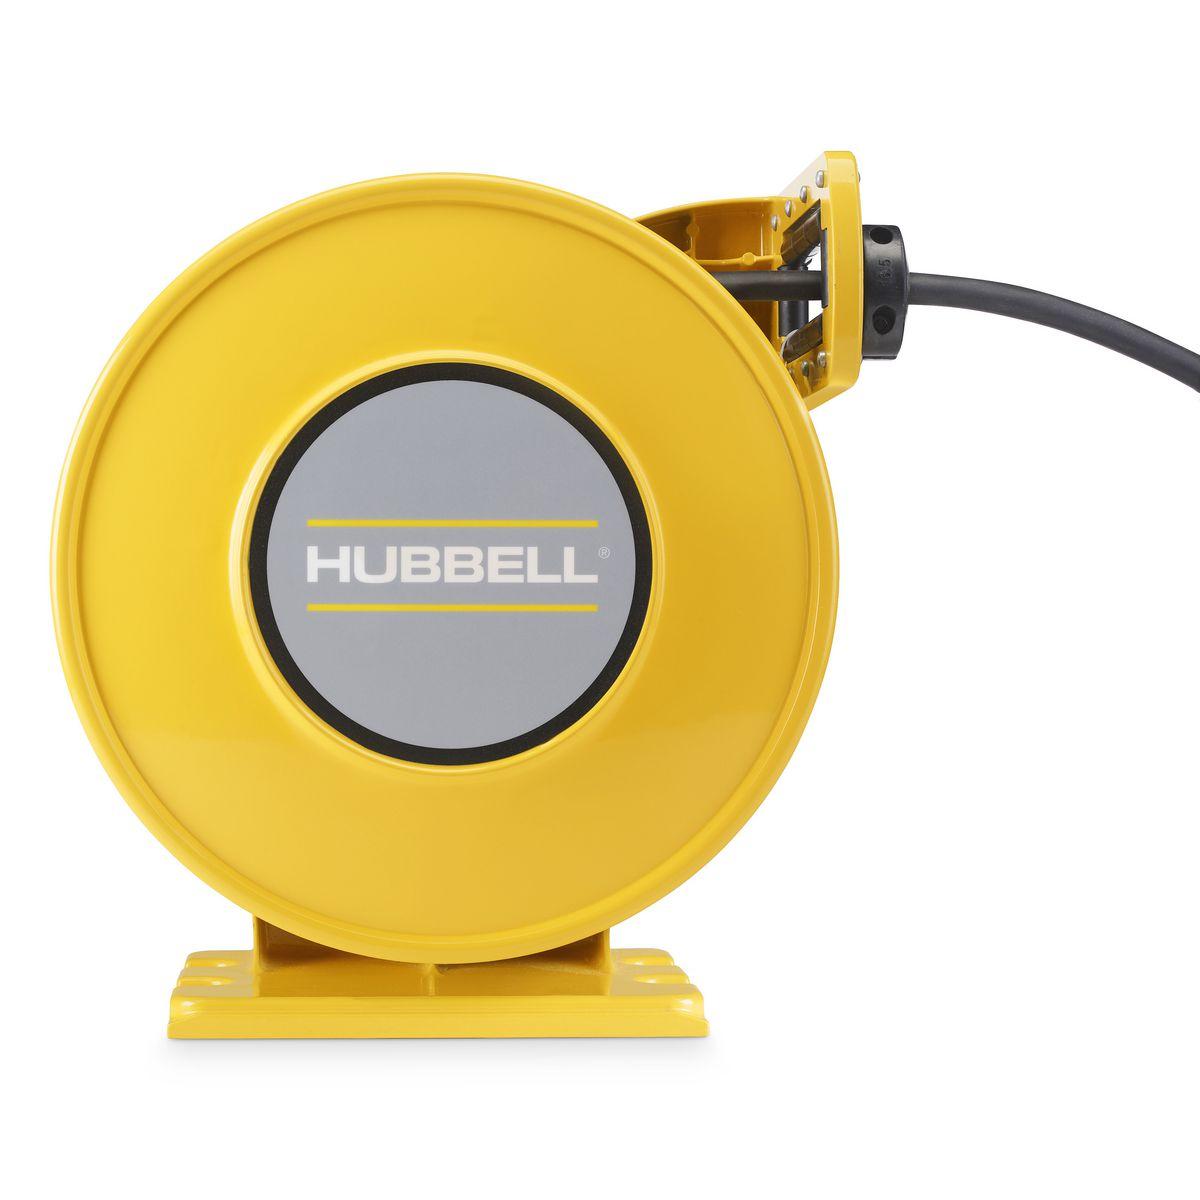 Hubbell's inREACH™ Industrial Cord Reels Provide Safe and